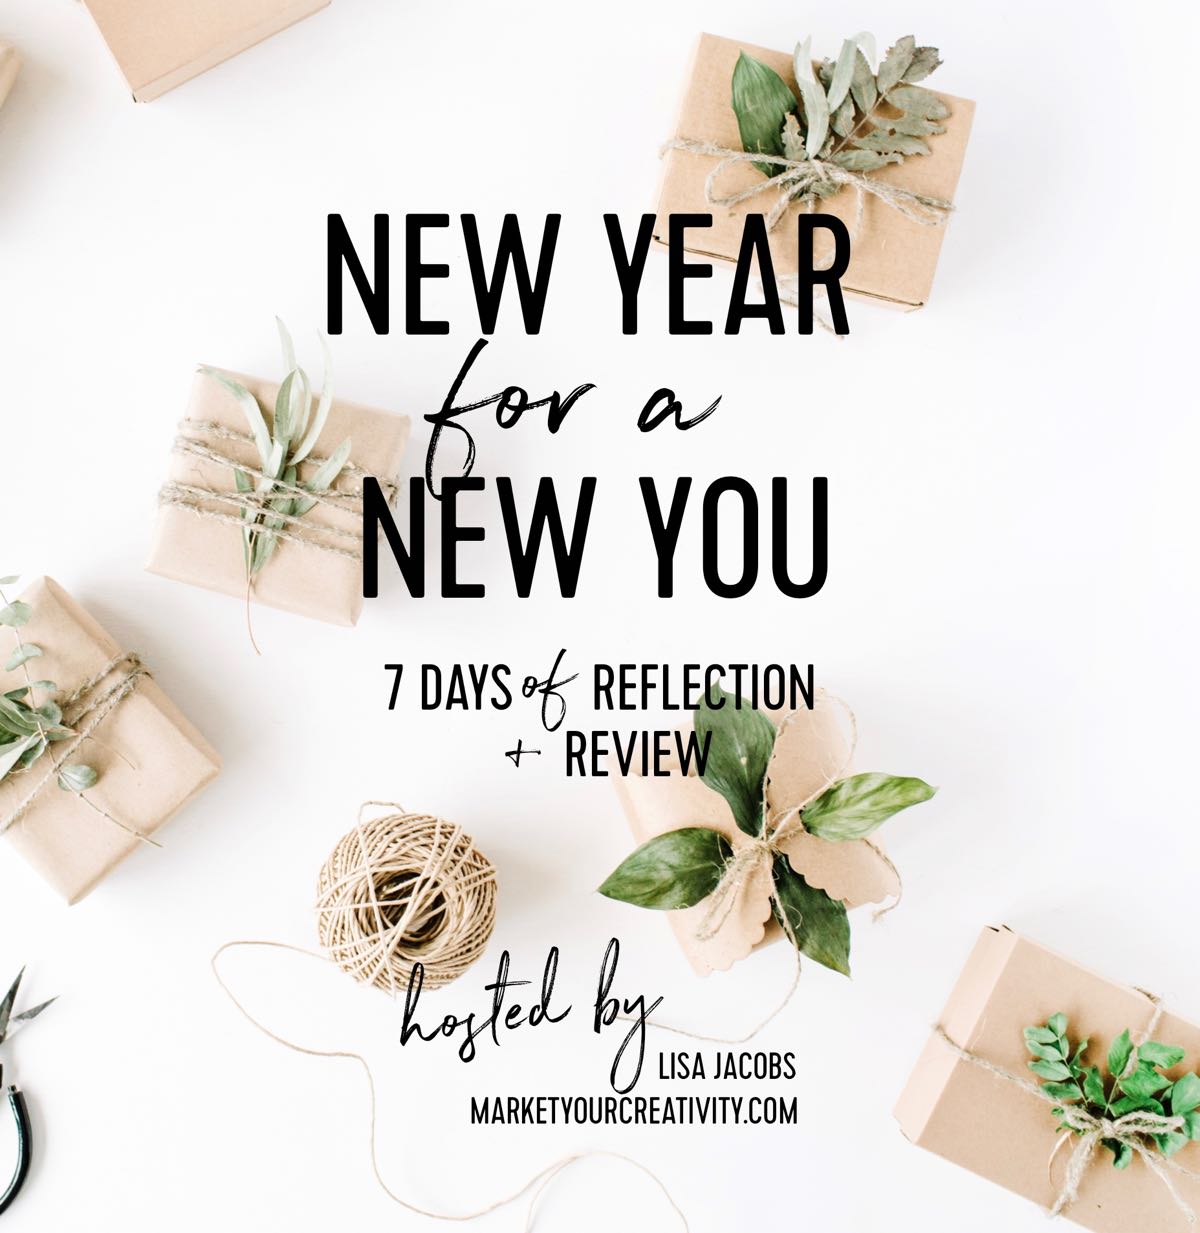 New Year for a New You 2017 Lisa Jacobs